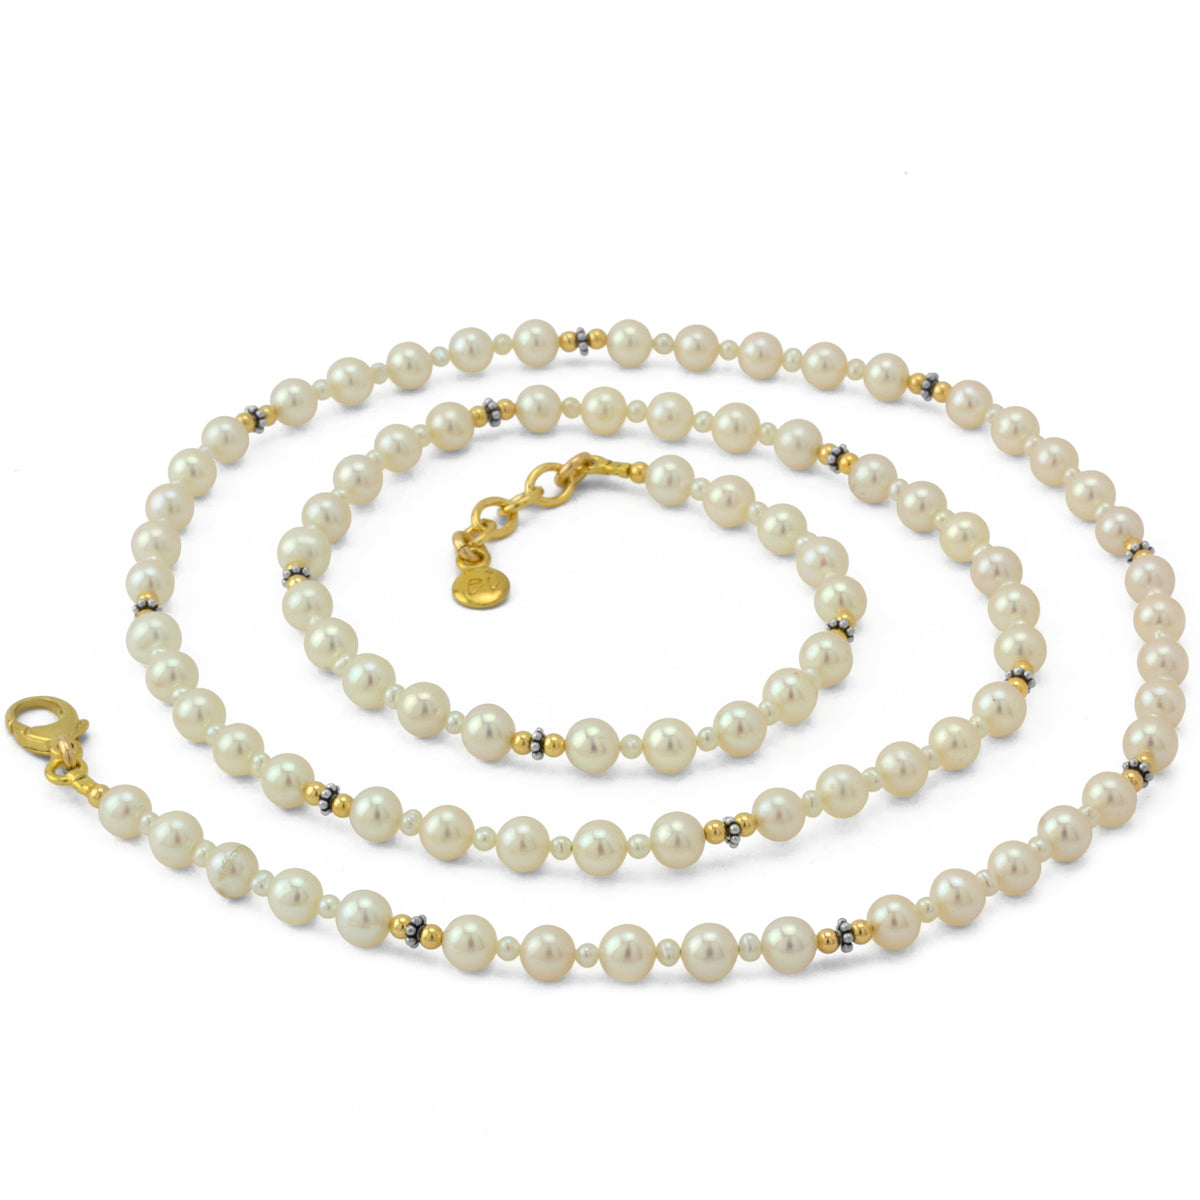 6.5mm Pearl Necklace